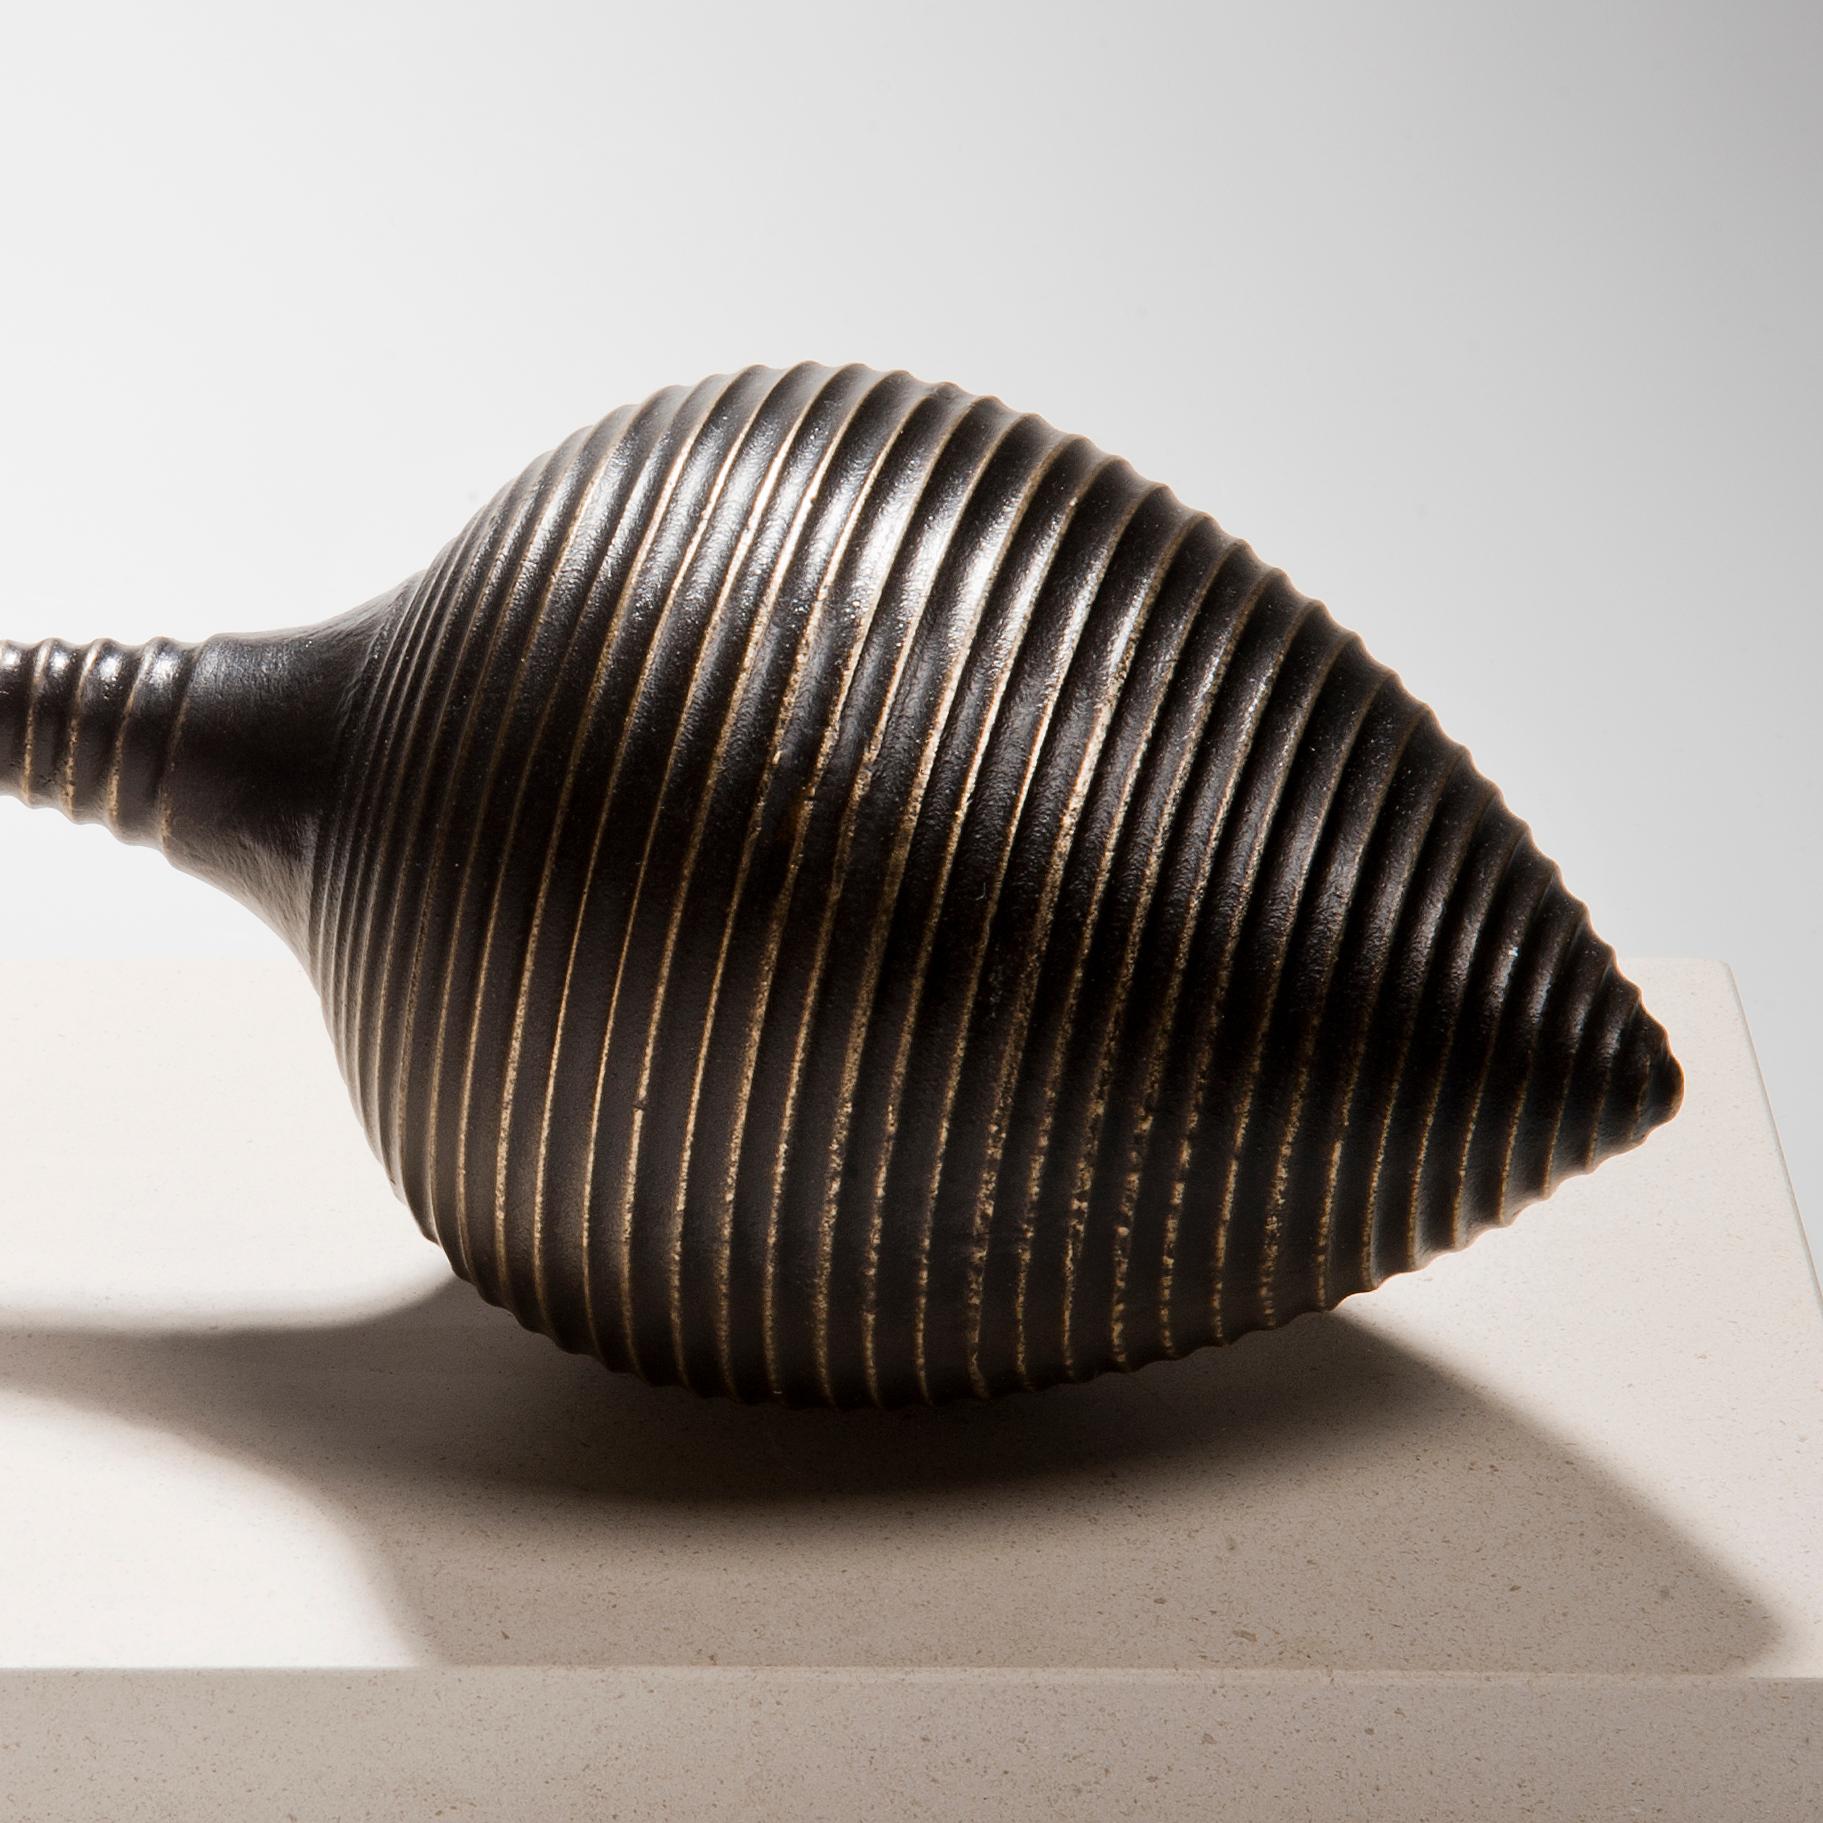 Bronze Conical Terminals, limited edition patinated bronze sculpture by Vivienne Foley For Sale